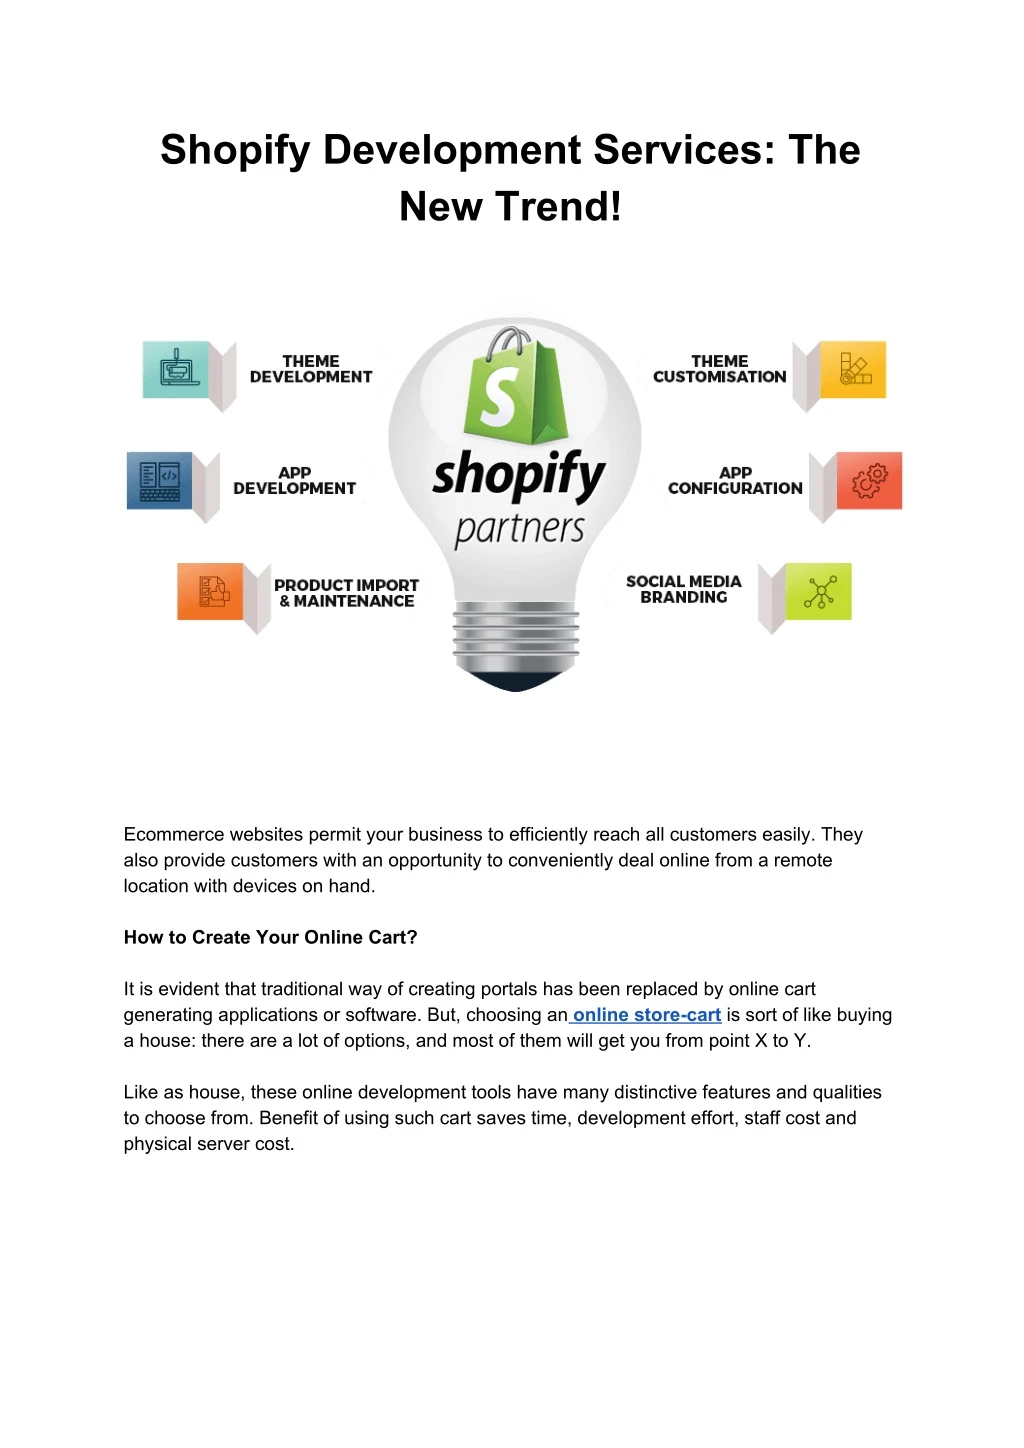 shopify development services the new trend